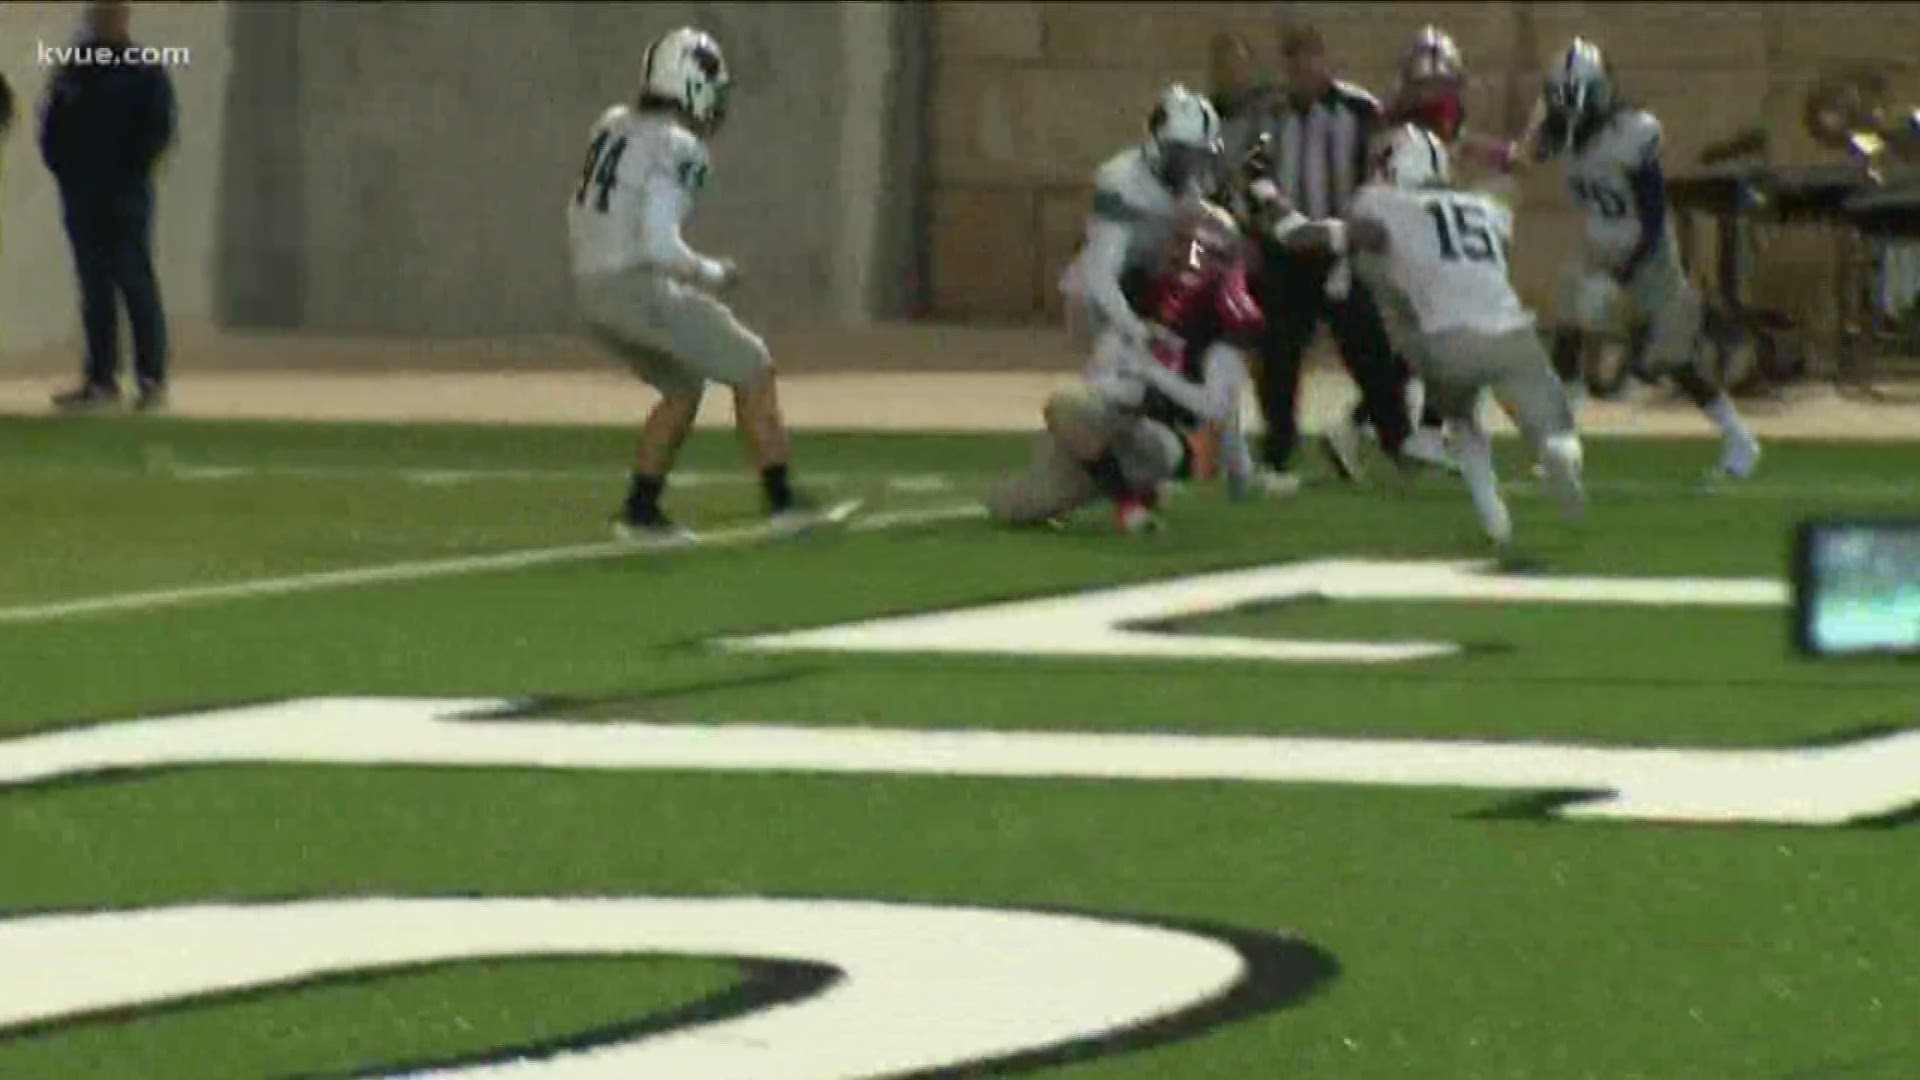 Three plays. One winner. Which play was your favorite to win KVUE's Big Save of the Week?